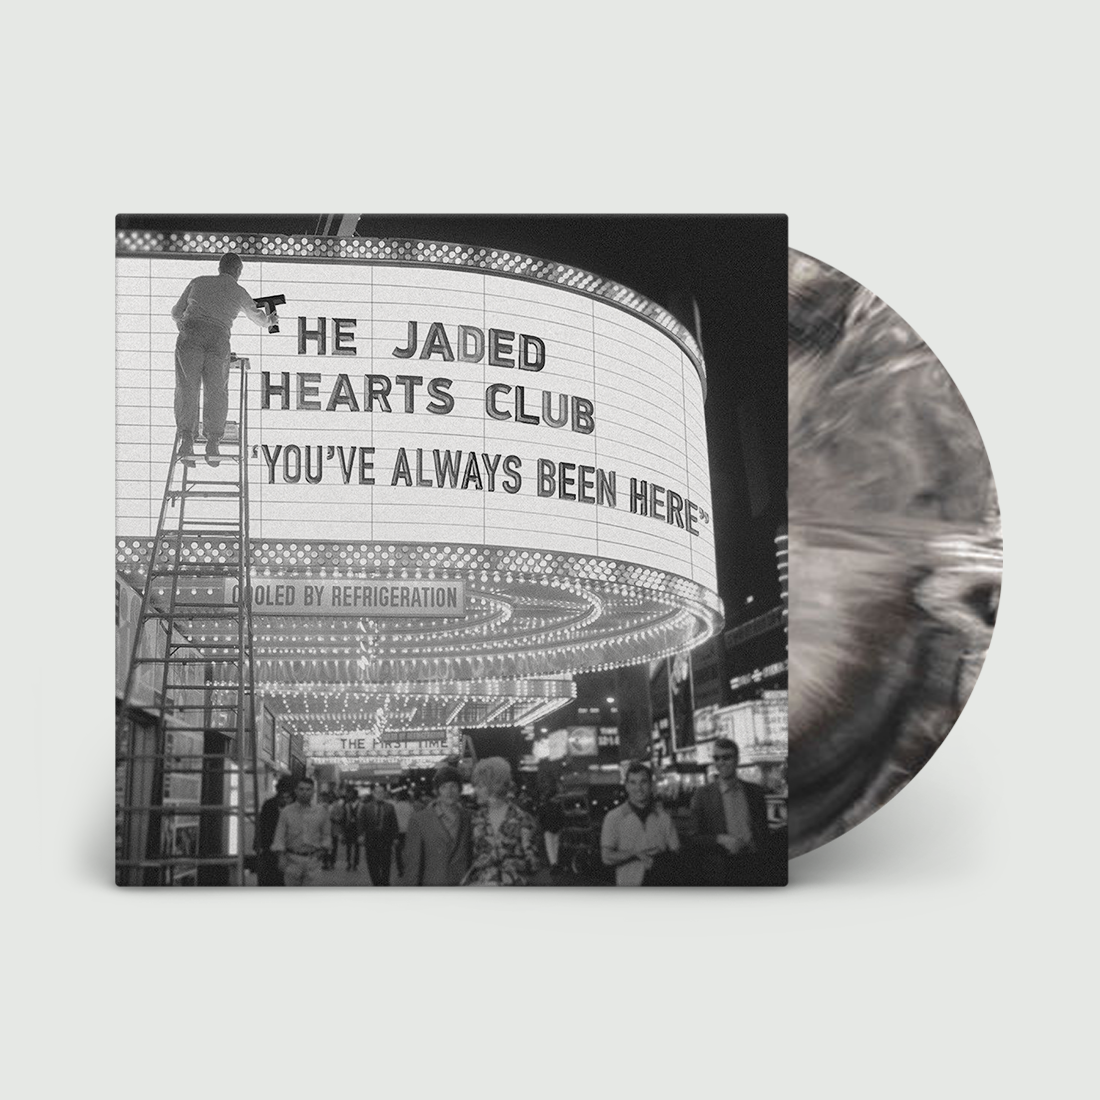 The Jaded Hearts Club - You’ve Always Been Here: Limited Marble Vinyl LP